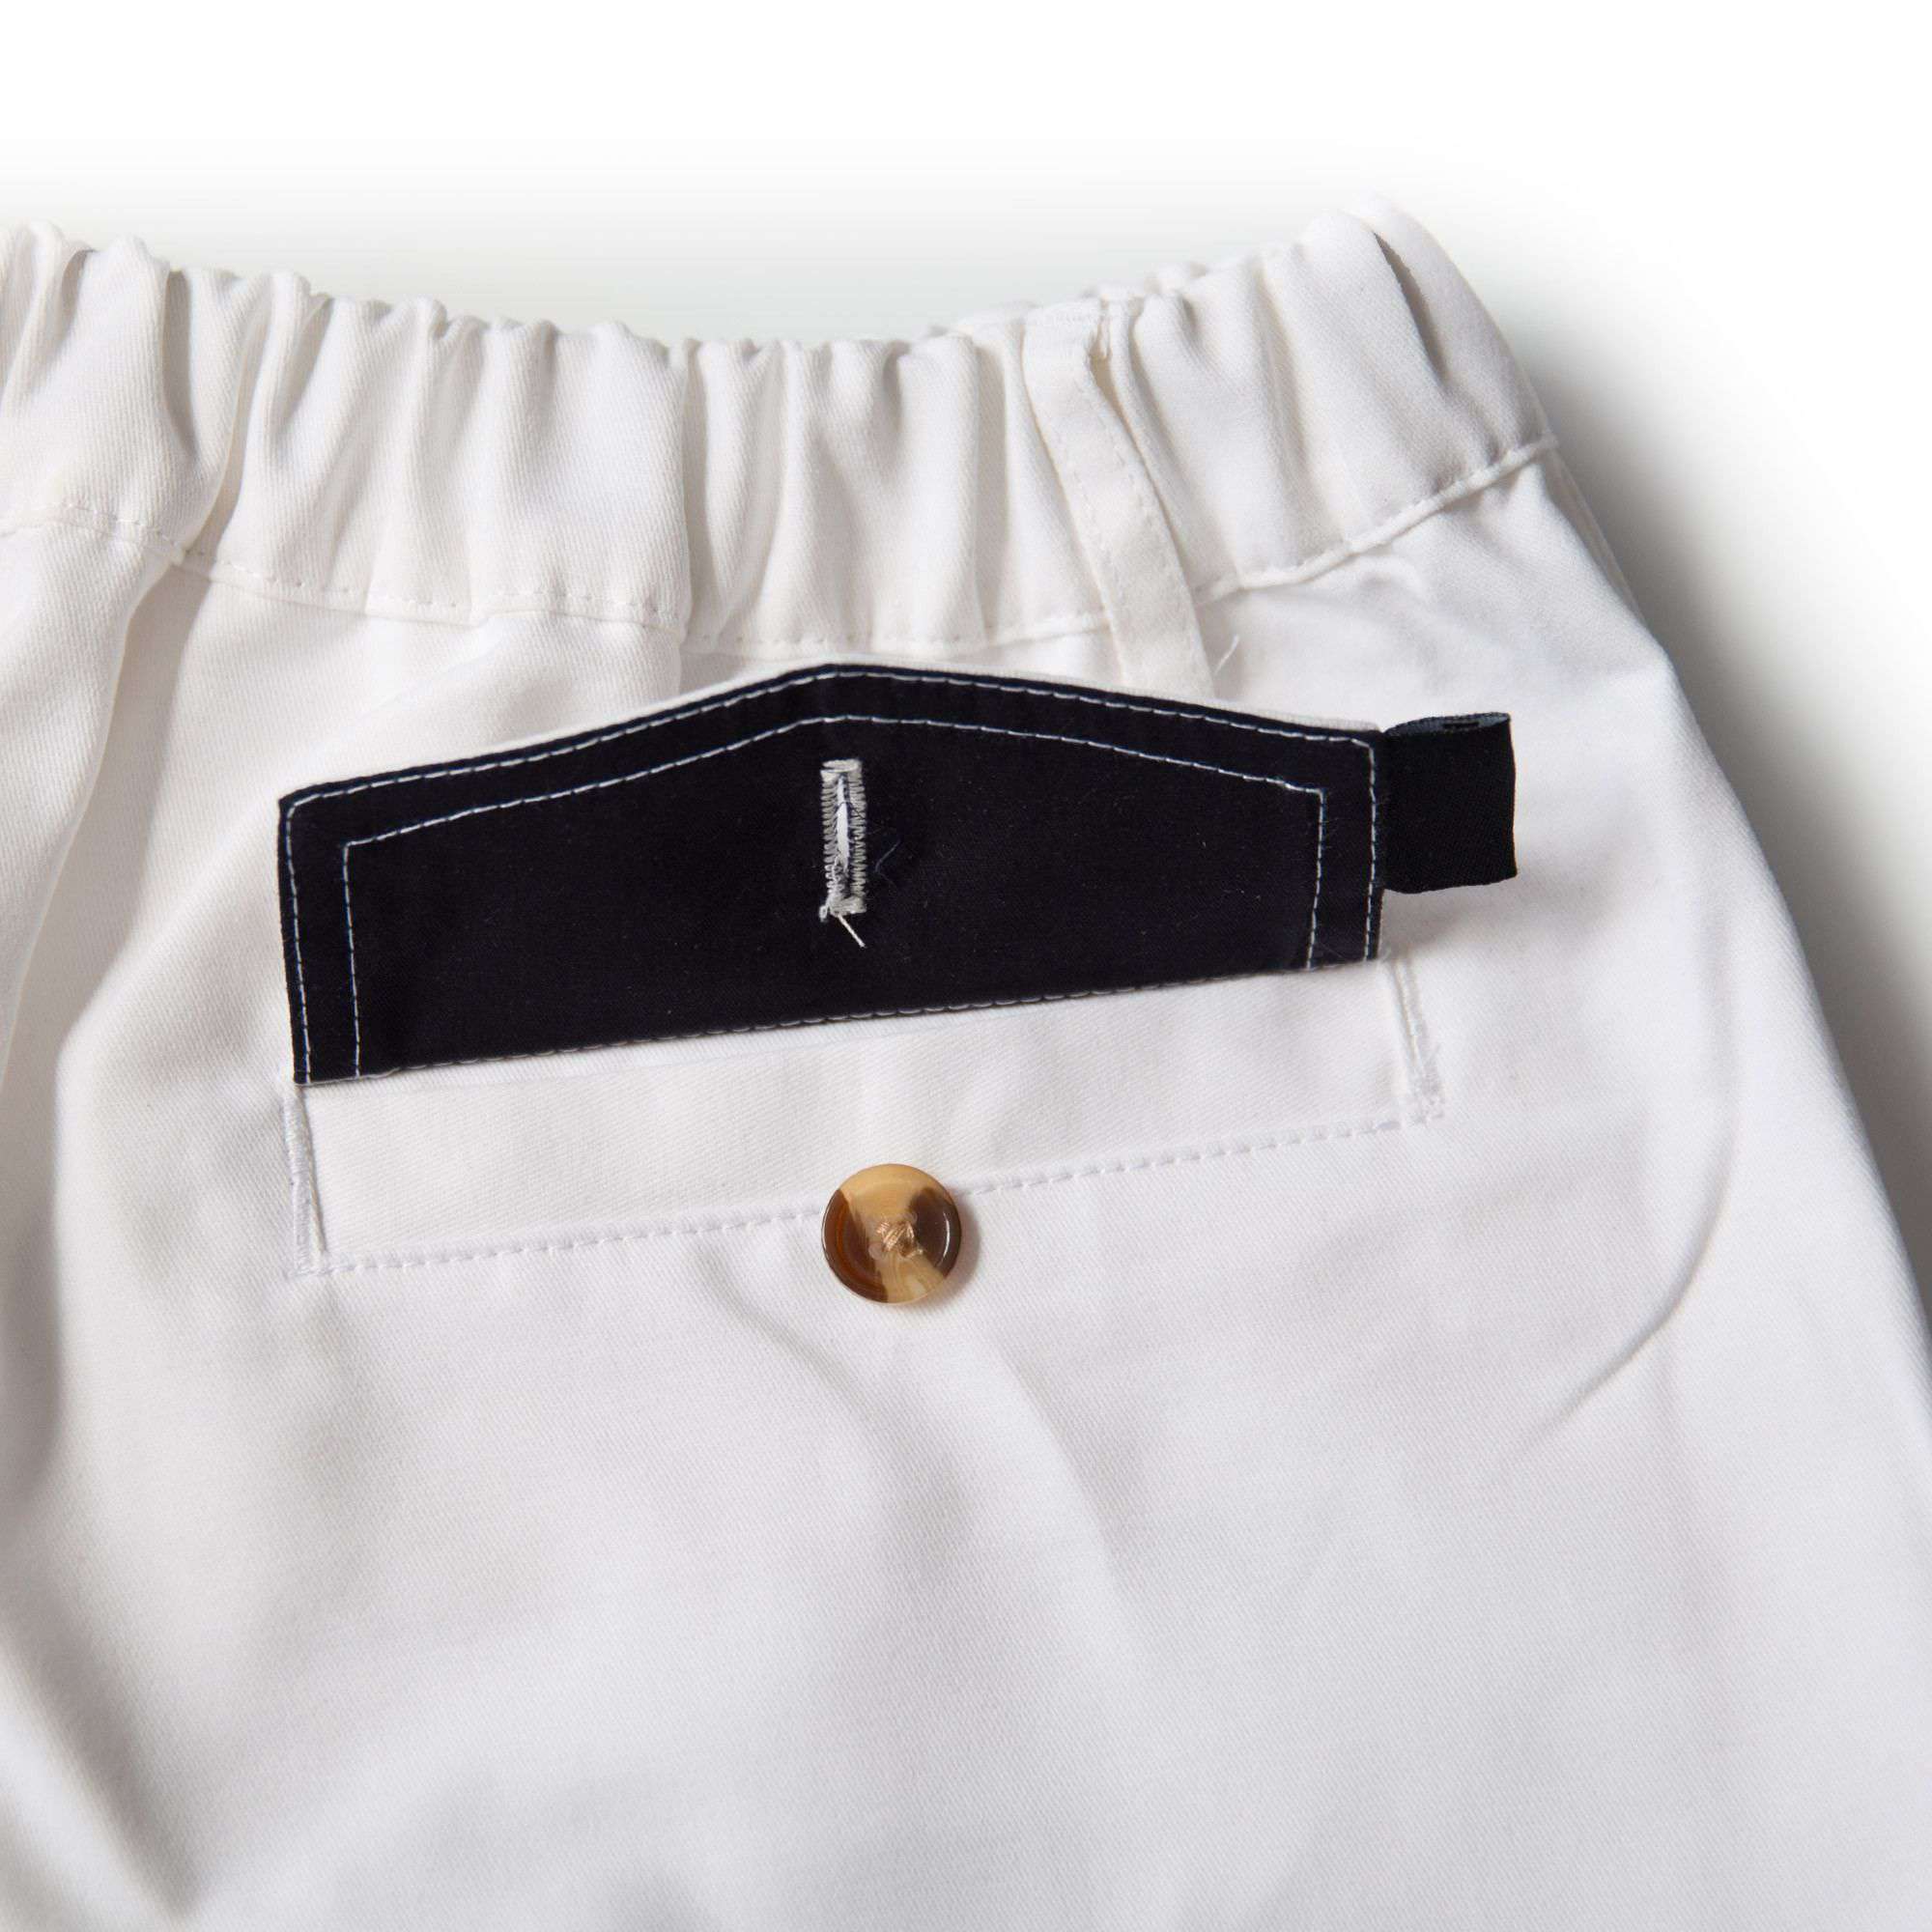 The Miami Whites 5.5" Shorts in White by Kennedy - Country Club Prep